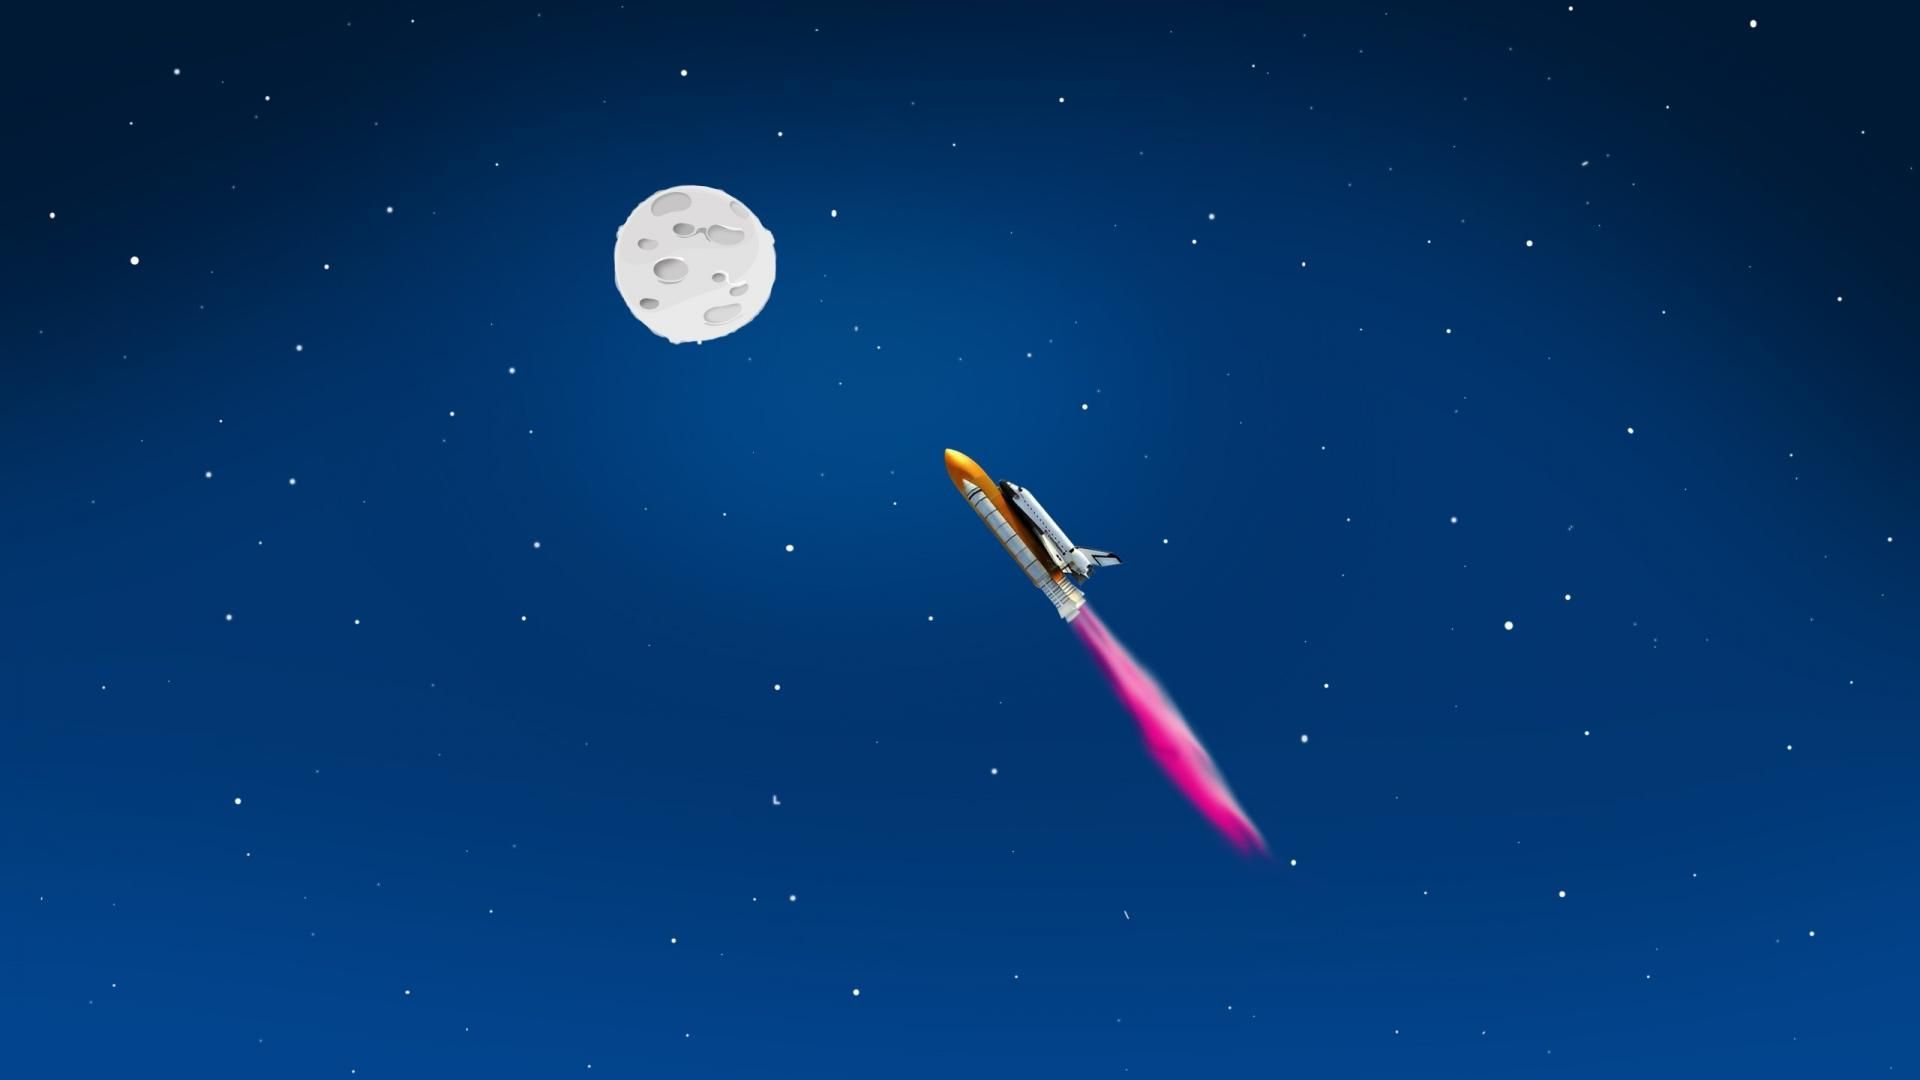 A Rocket to the Moon Wallpaper. Awesome Moon Wallpaper, Pretty Moon Wallpaper and Moon Wallpaper